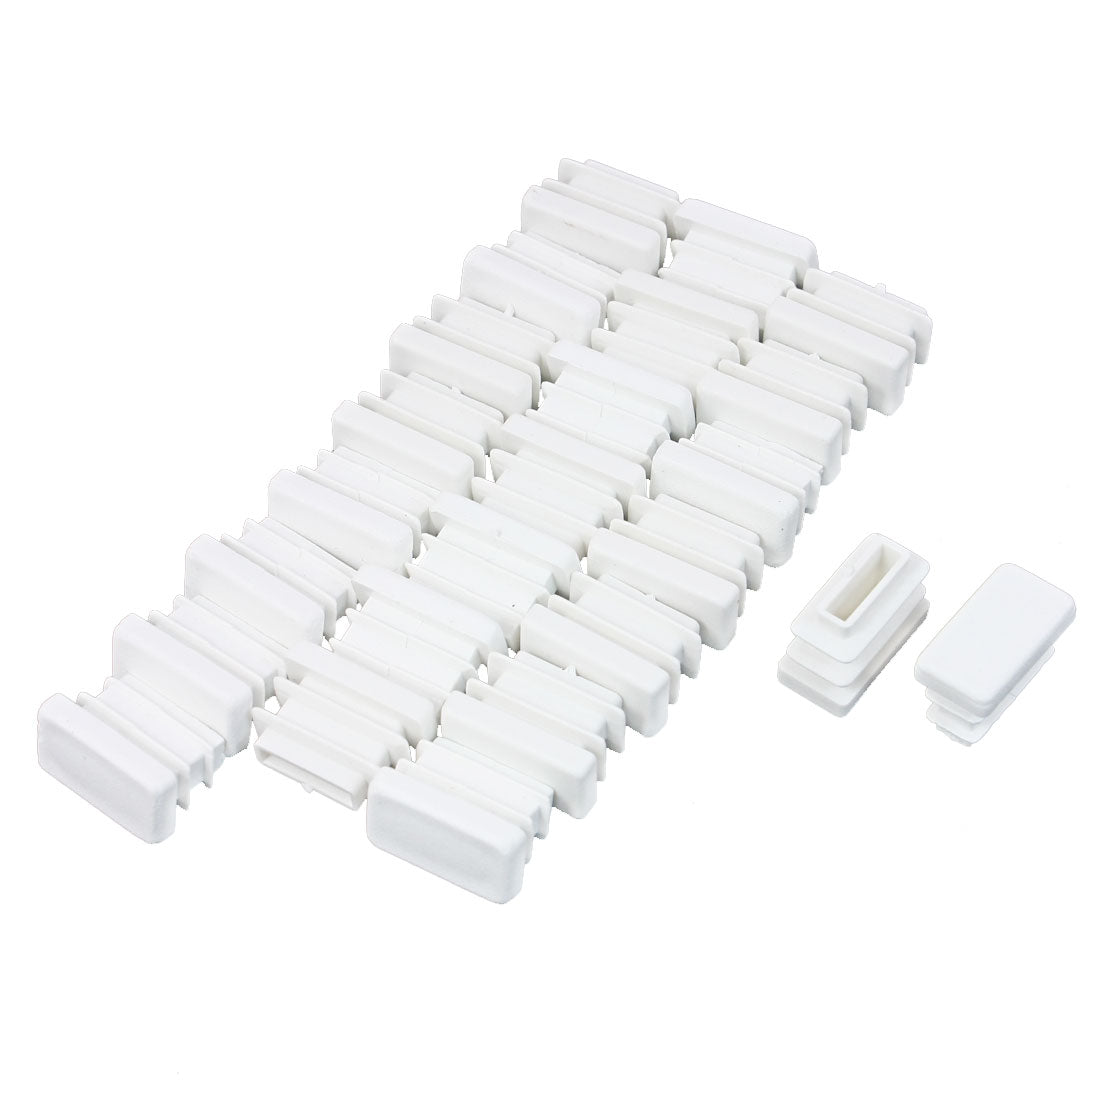 uxcell Uxcell 24 Pcs 10mm x 20mm Plastic Blanking End Caps Rectangle Tubing Tube Insert White